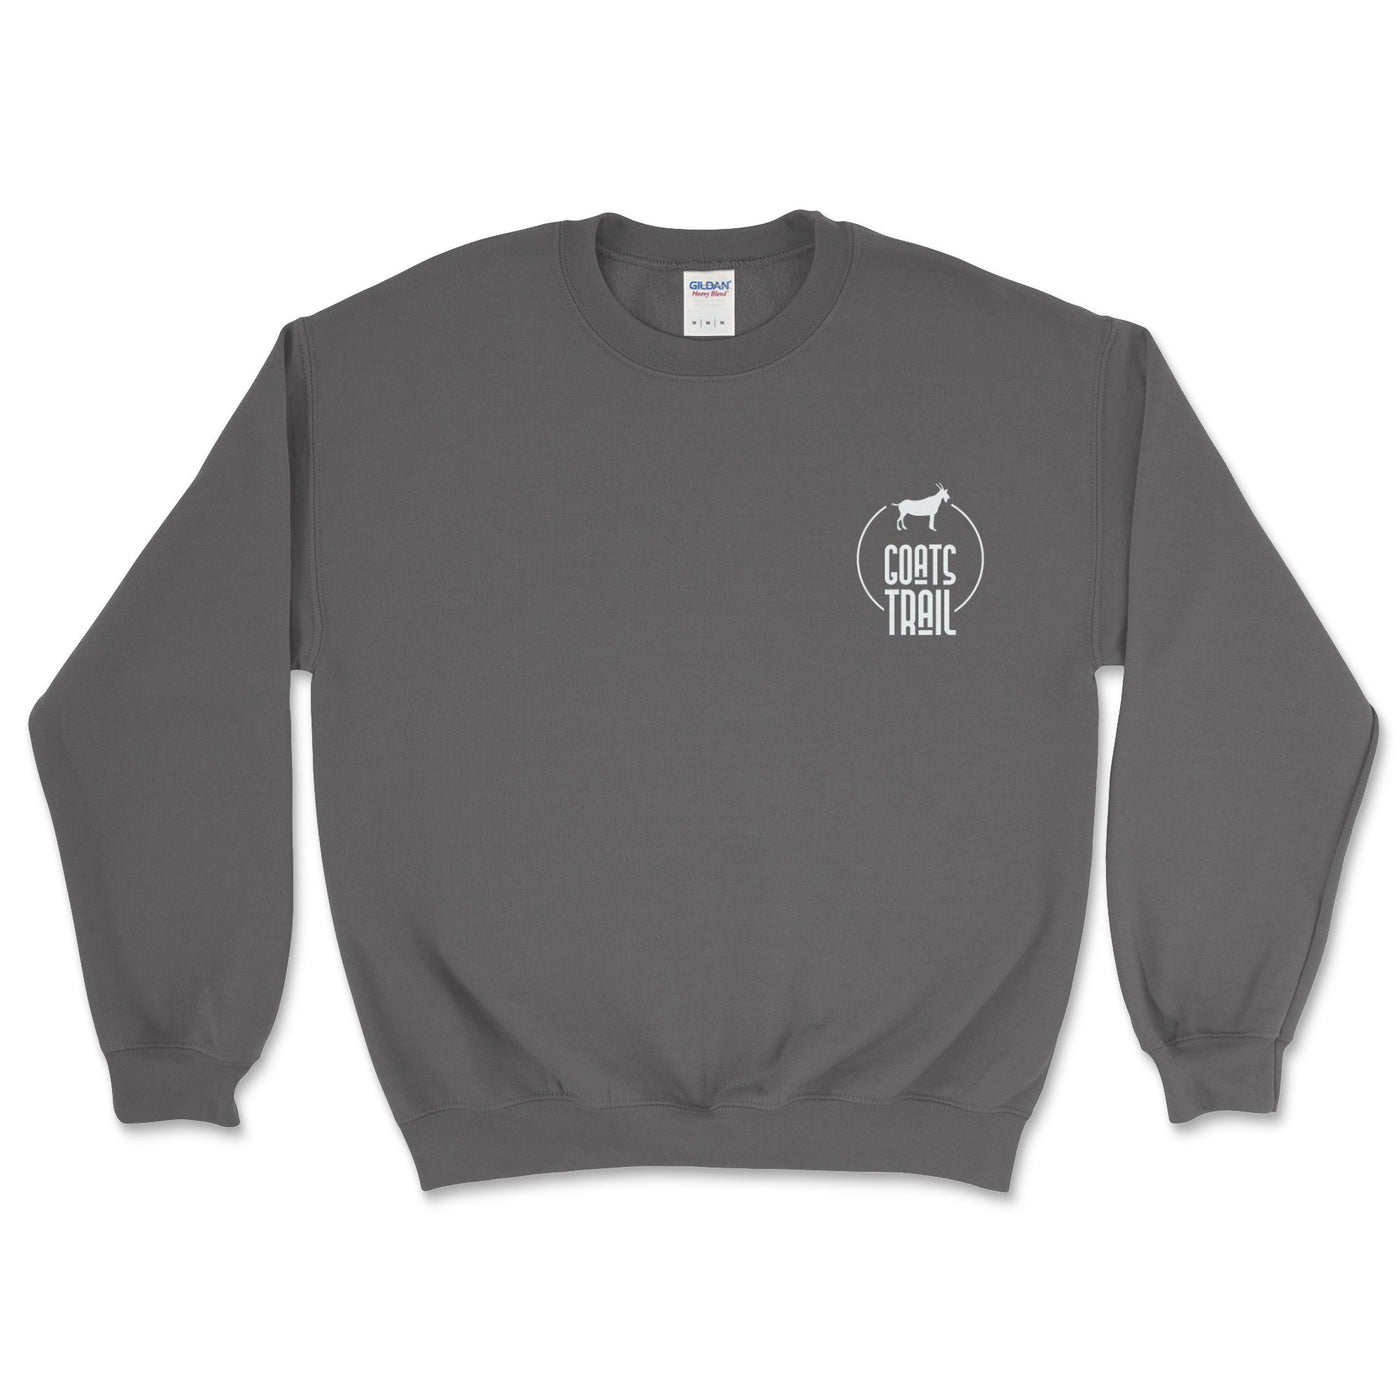 It's Now Just A Hobby, It's An Escape from Reality Sweatshirt - Goats Trail Off-Road Apparel Company